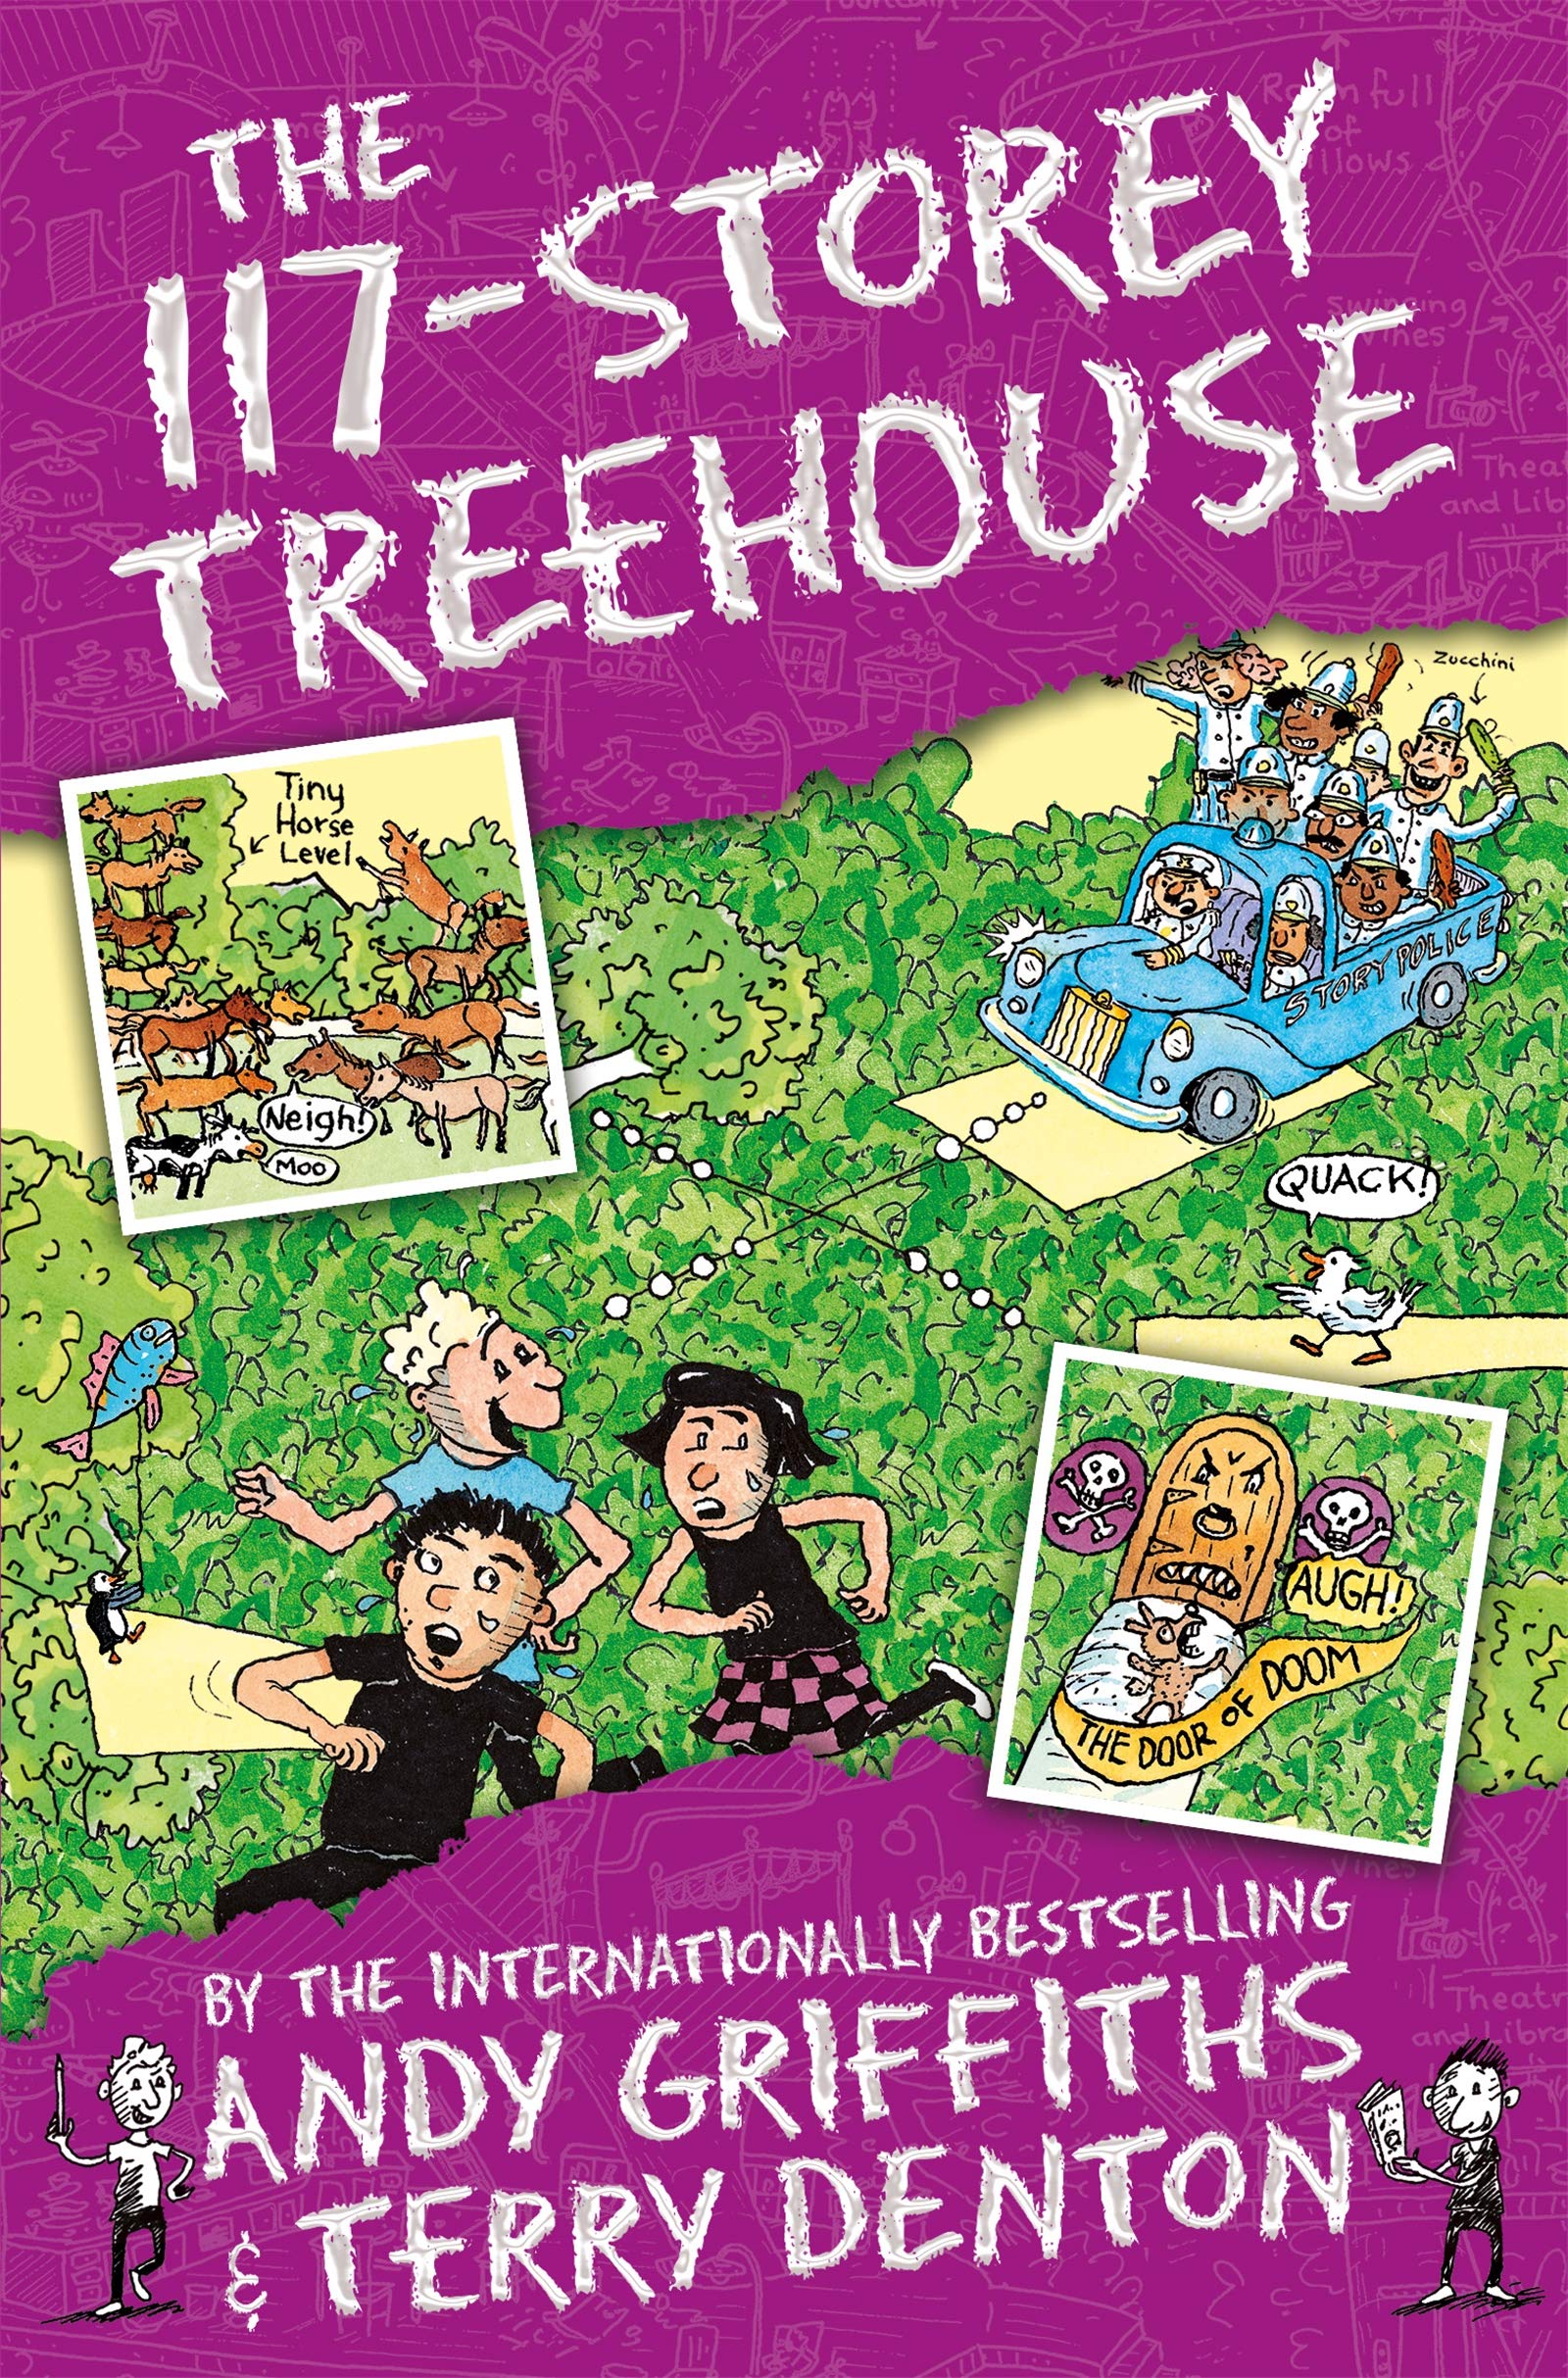 When Will The 117-Storey Treehouse Book Release?